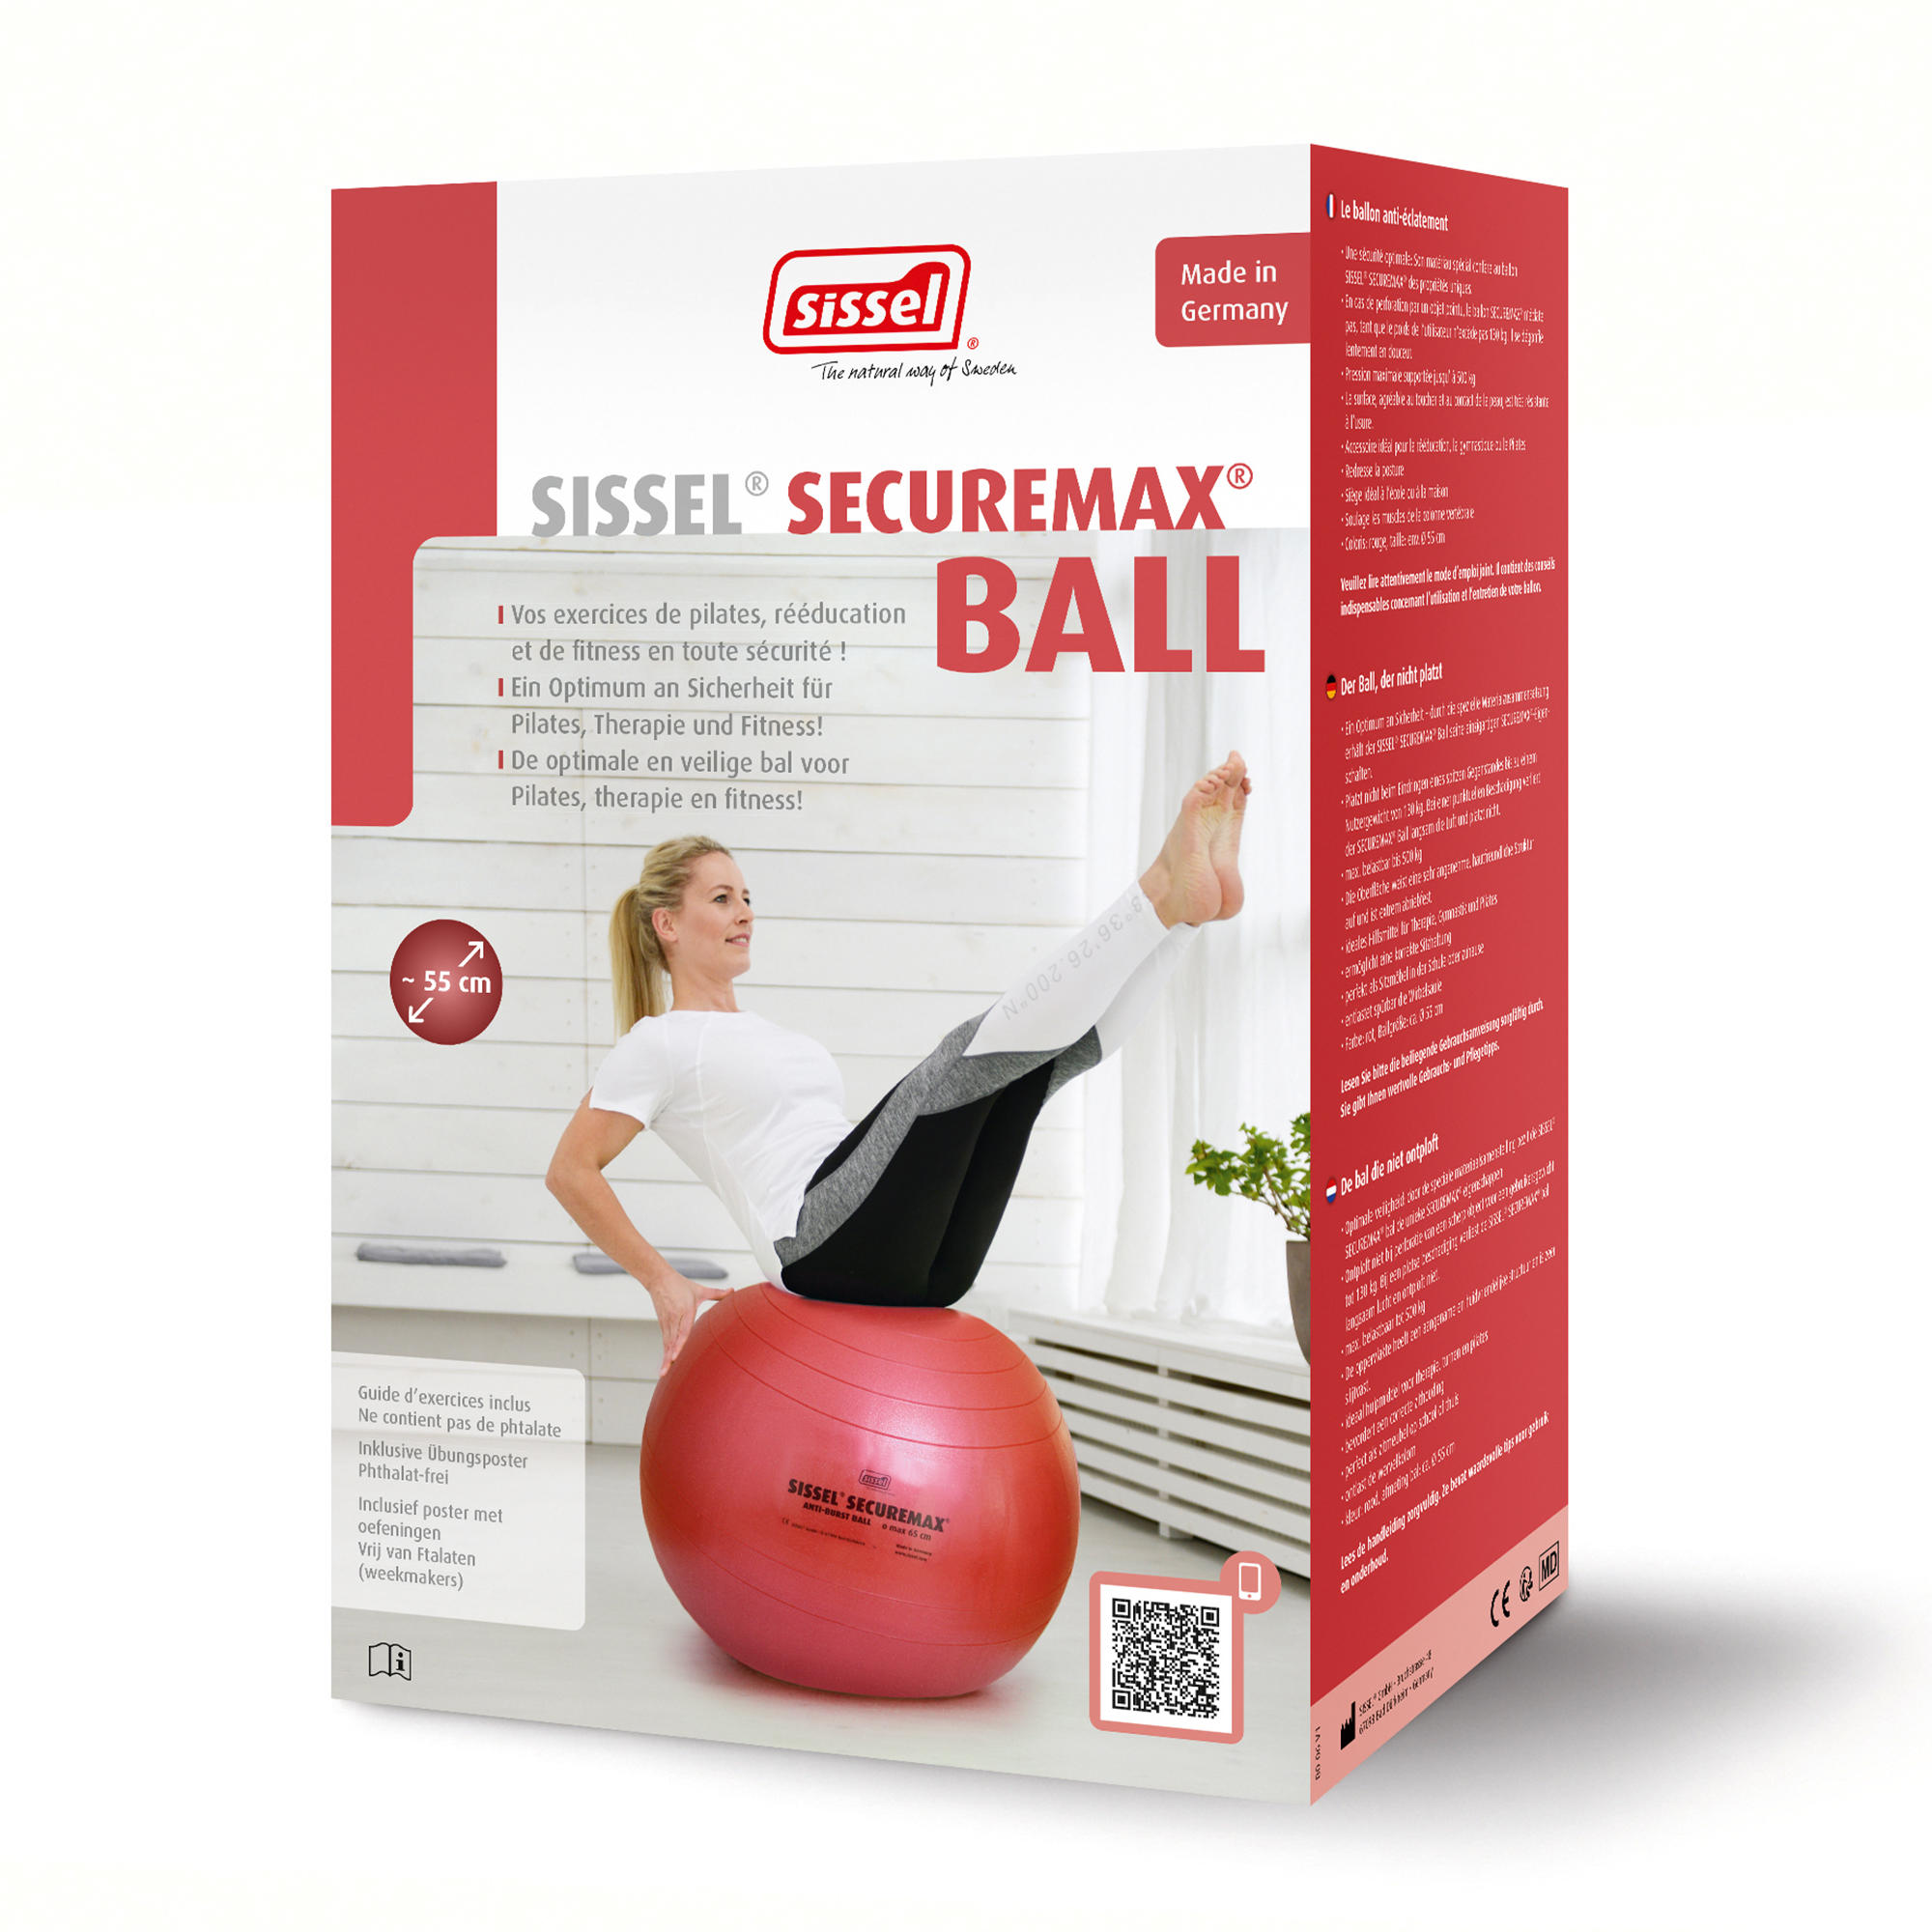 Gym Ball Secure Max Fitness Size 1 55 cm - Pink 2/2